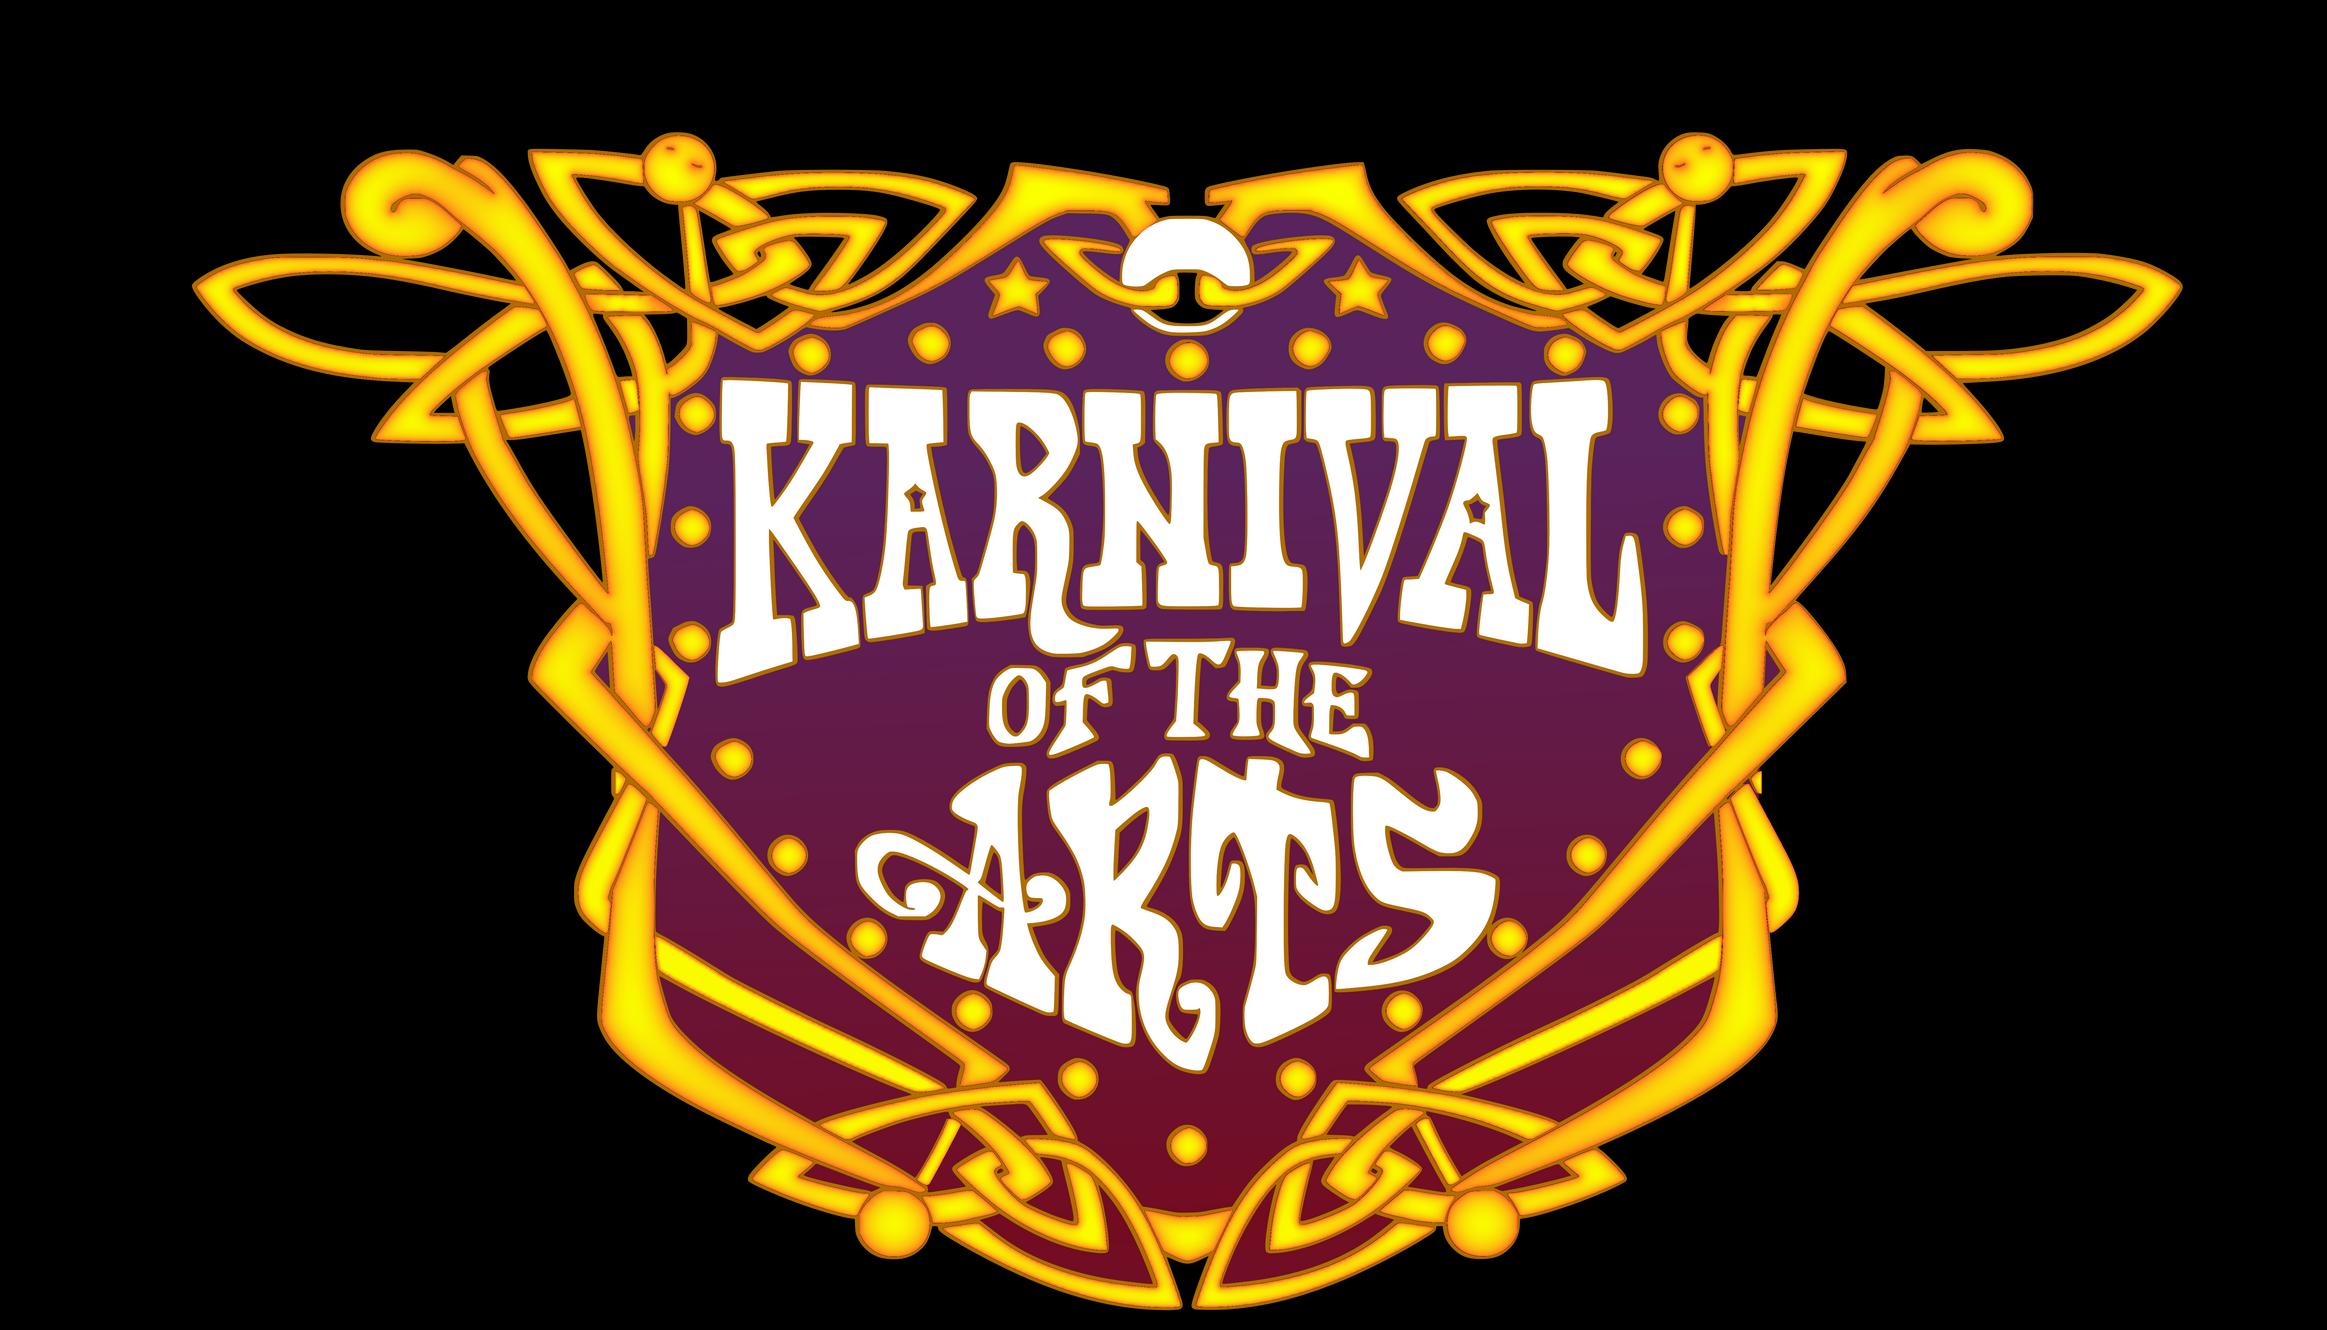 Karnival of the Arts West